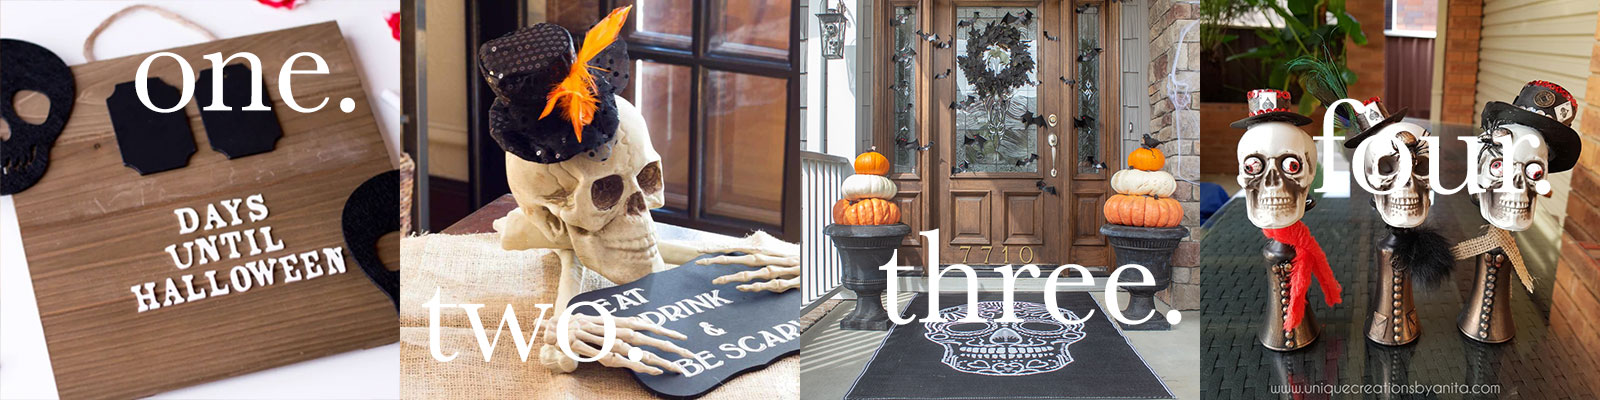 Putting together a list of Halloween decoration ideas - just a little inspiration to spruce up your home for the spookiest time of the year!